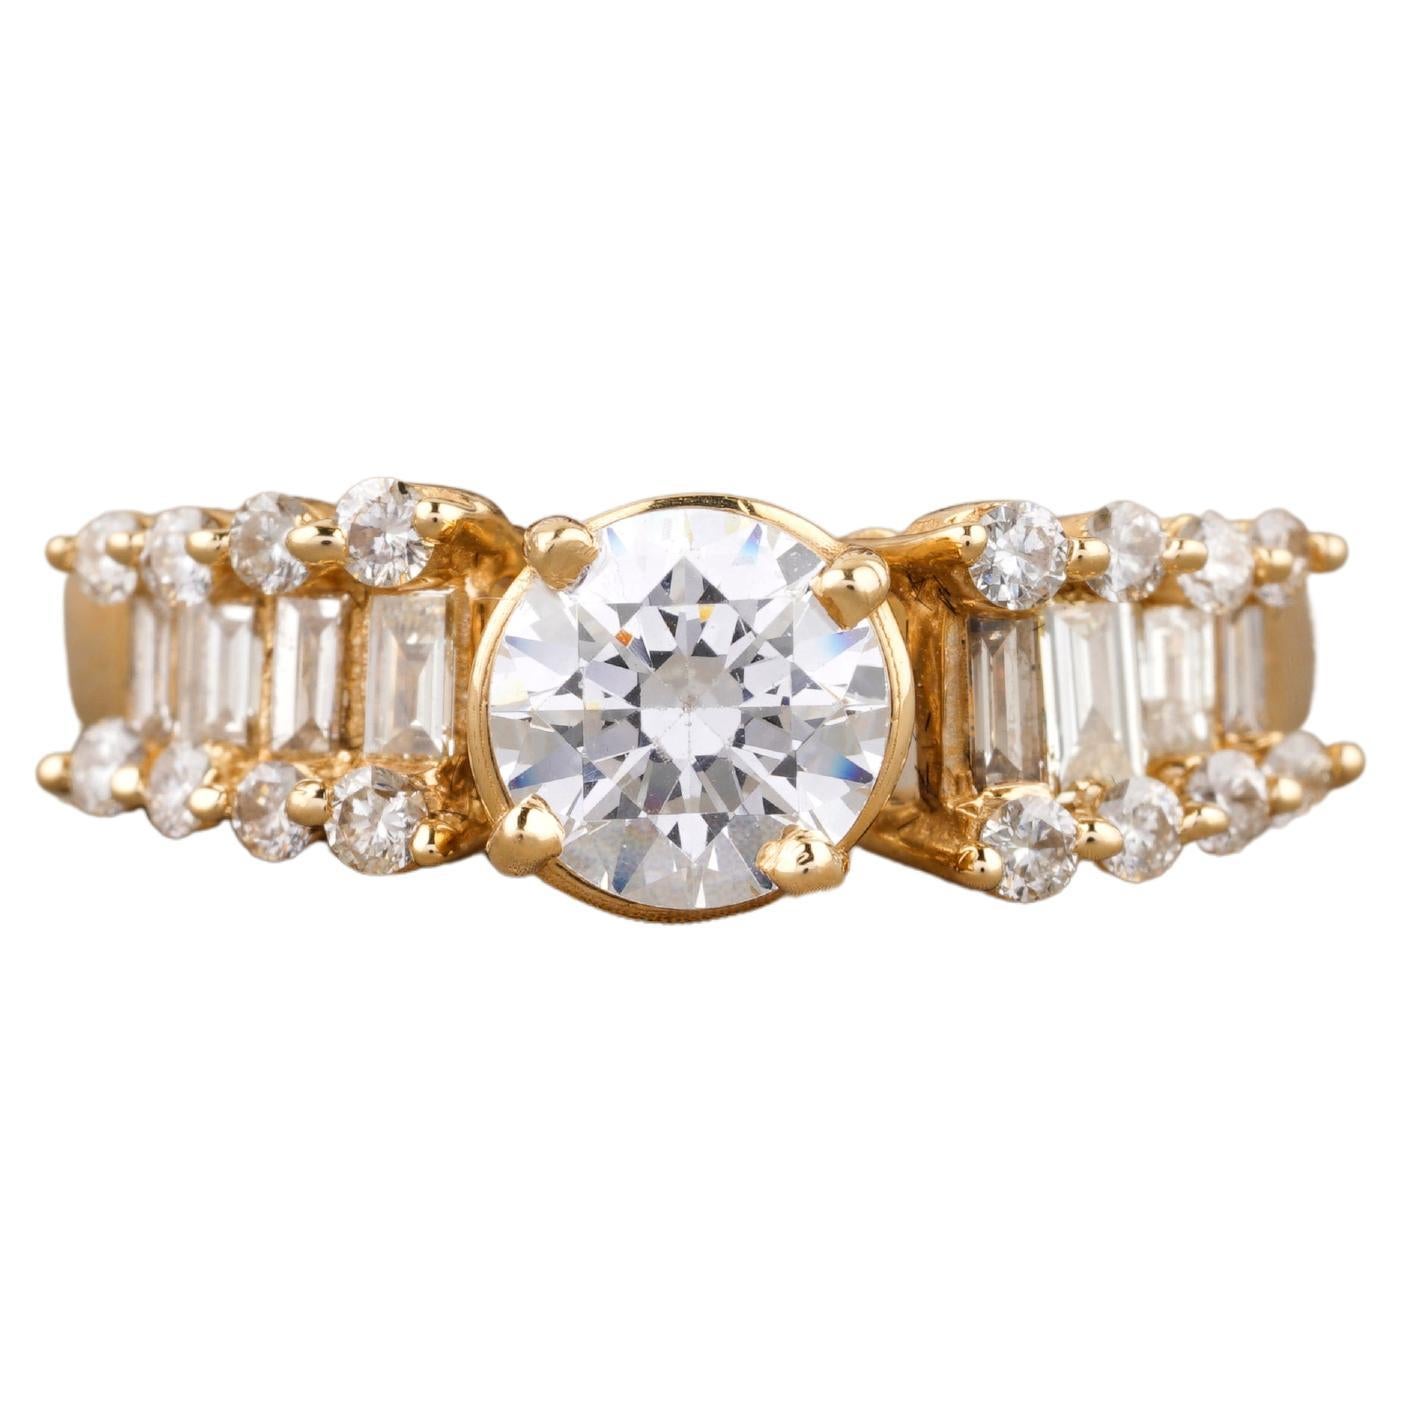 For Sale:  1.5 Carat Round Solitaire Diamond Ring with Baguettes in 18k Solid Gold